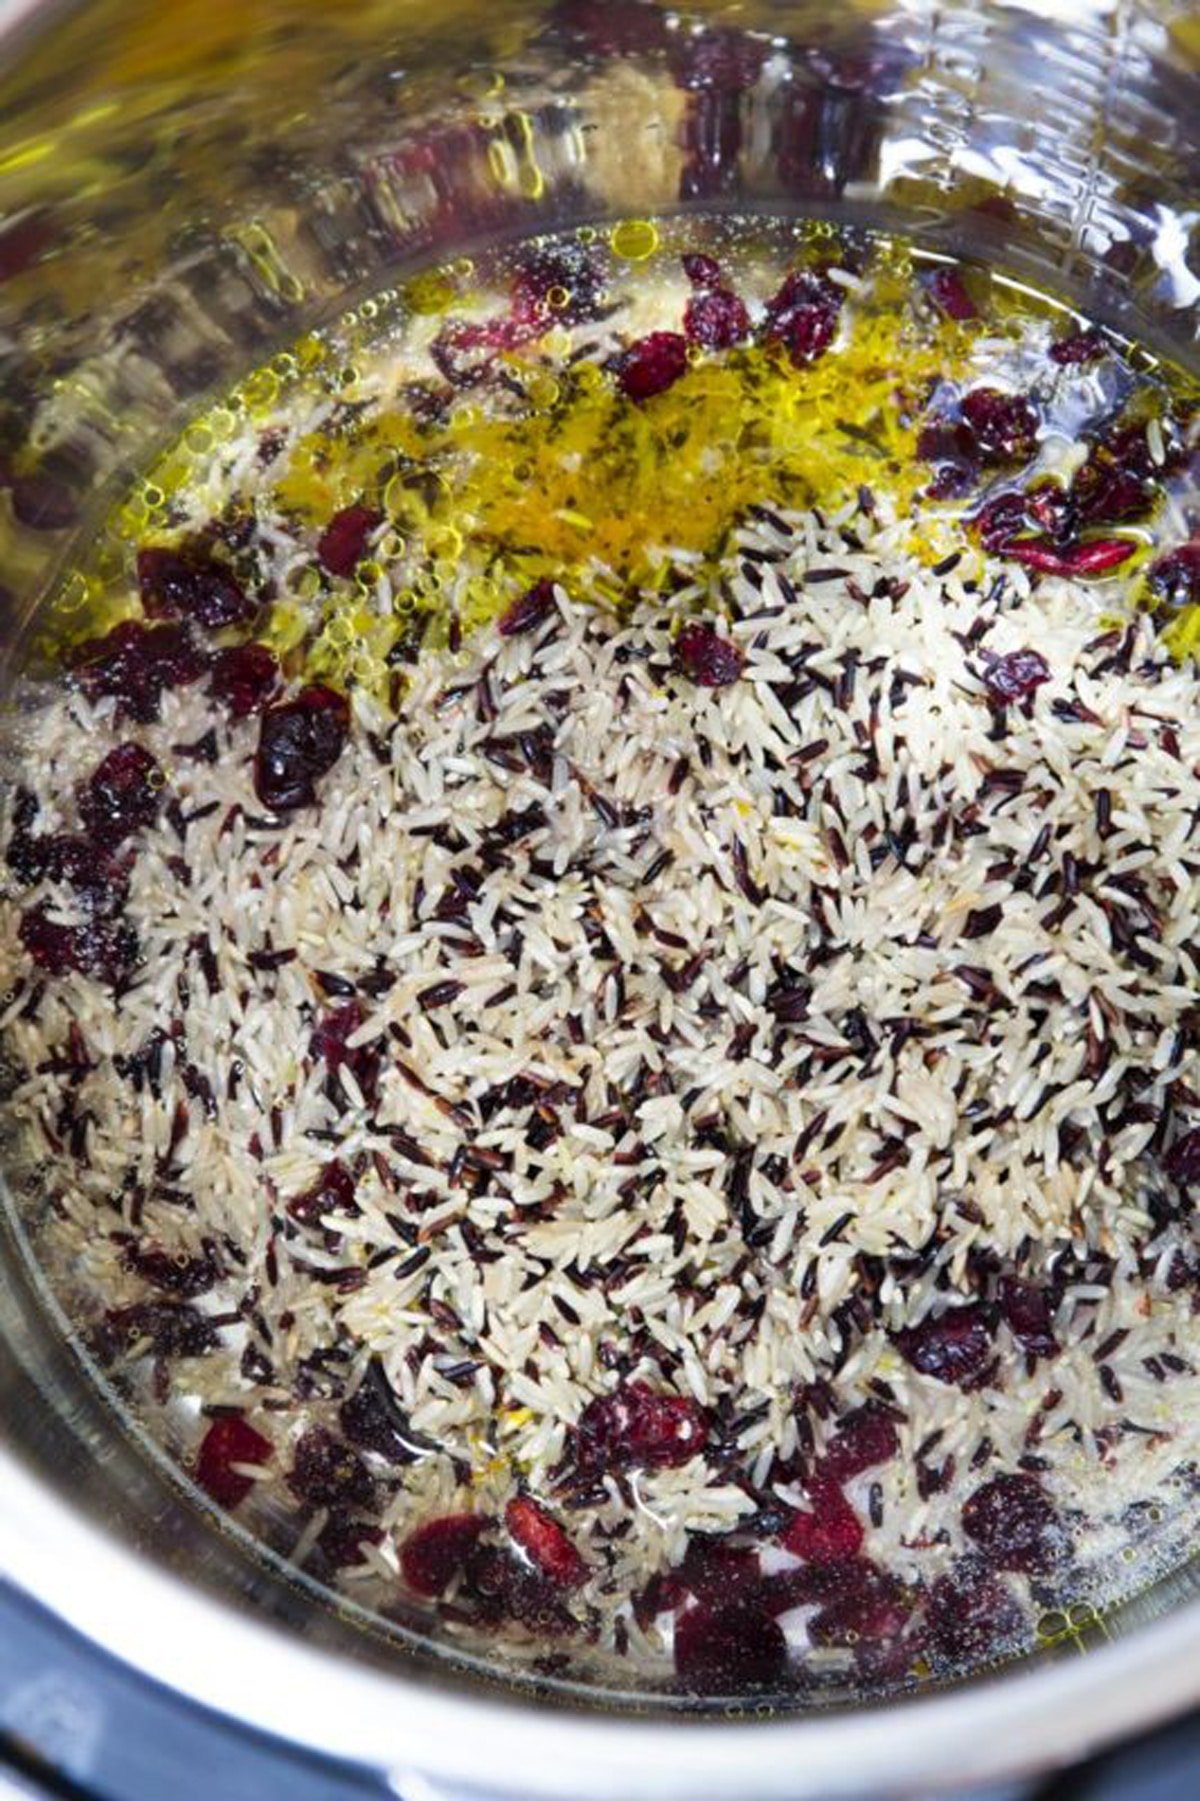 rice, water, lemon juice, olive oil, and dried cranberries in an instant pot.